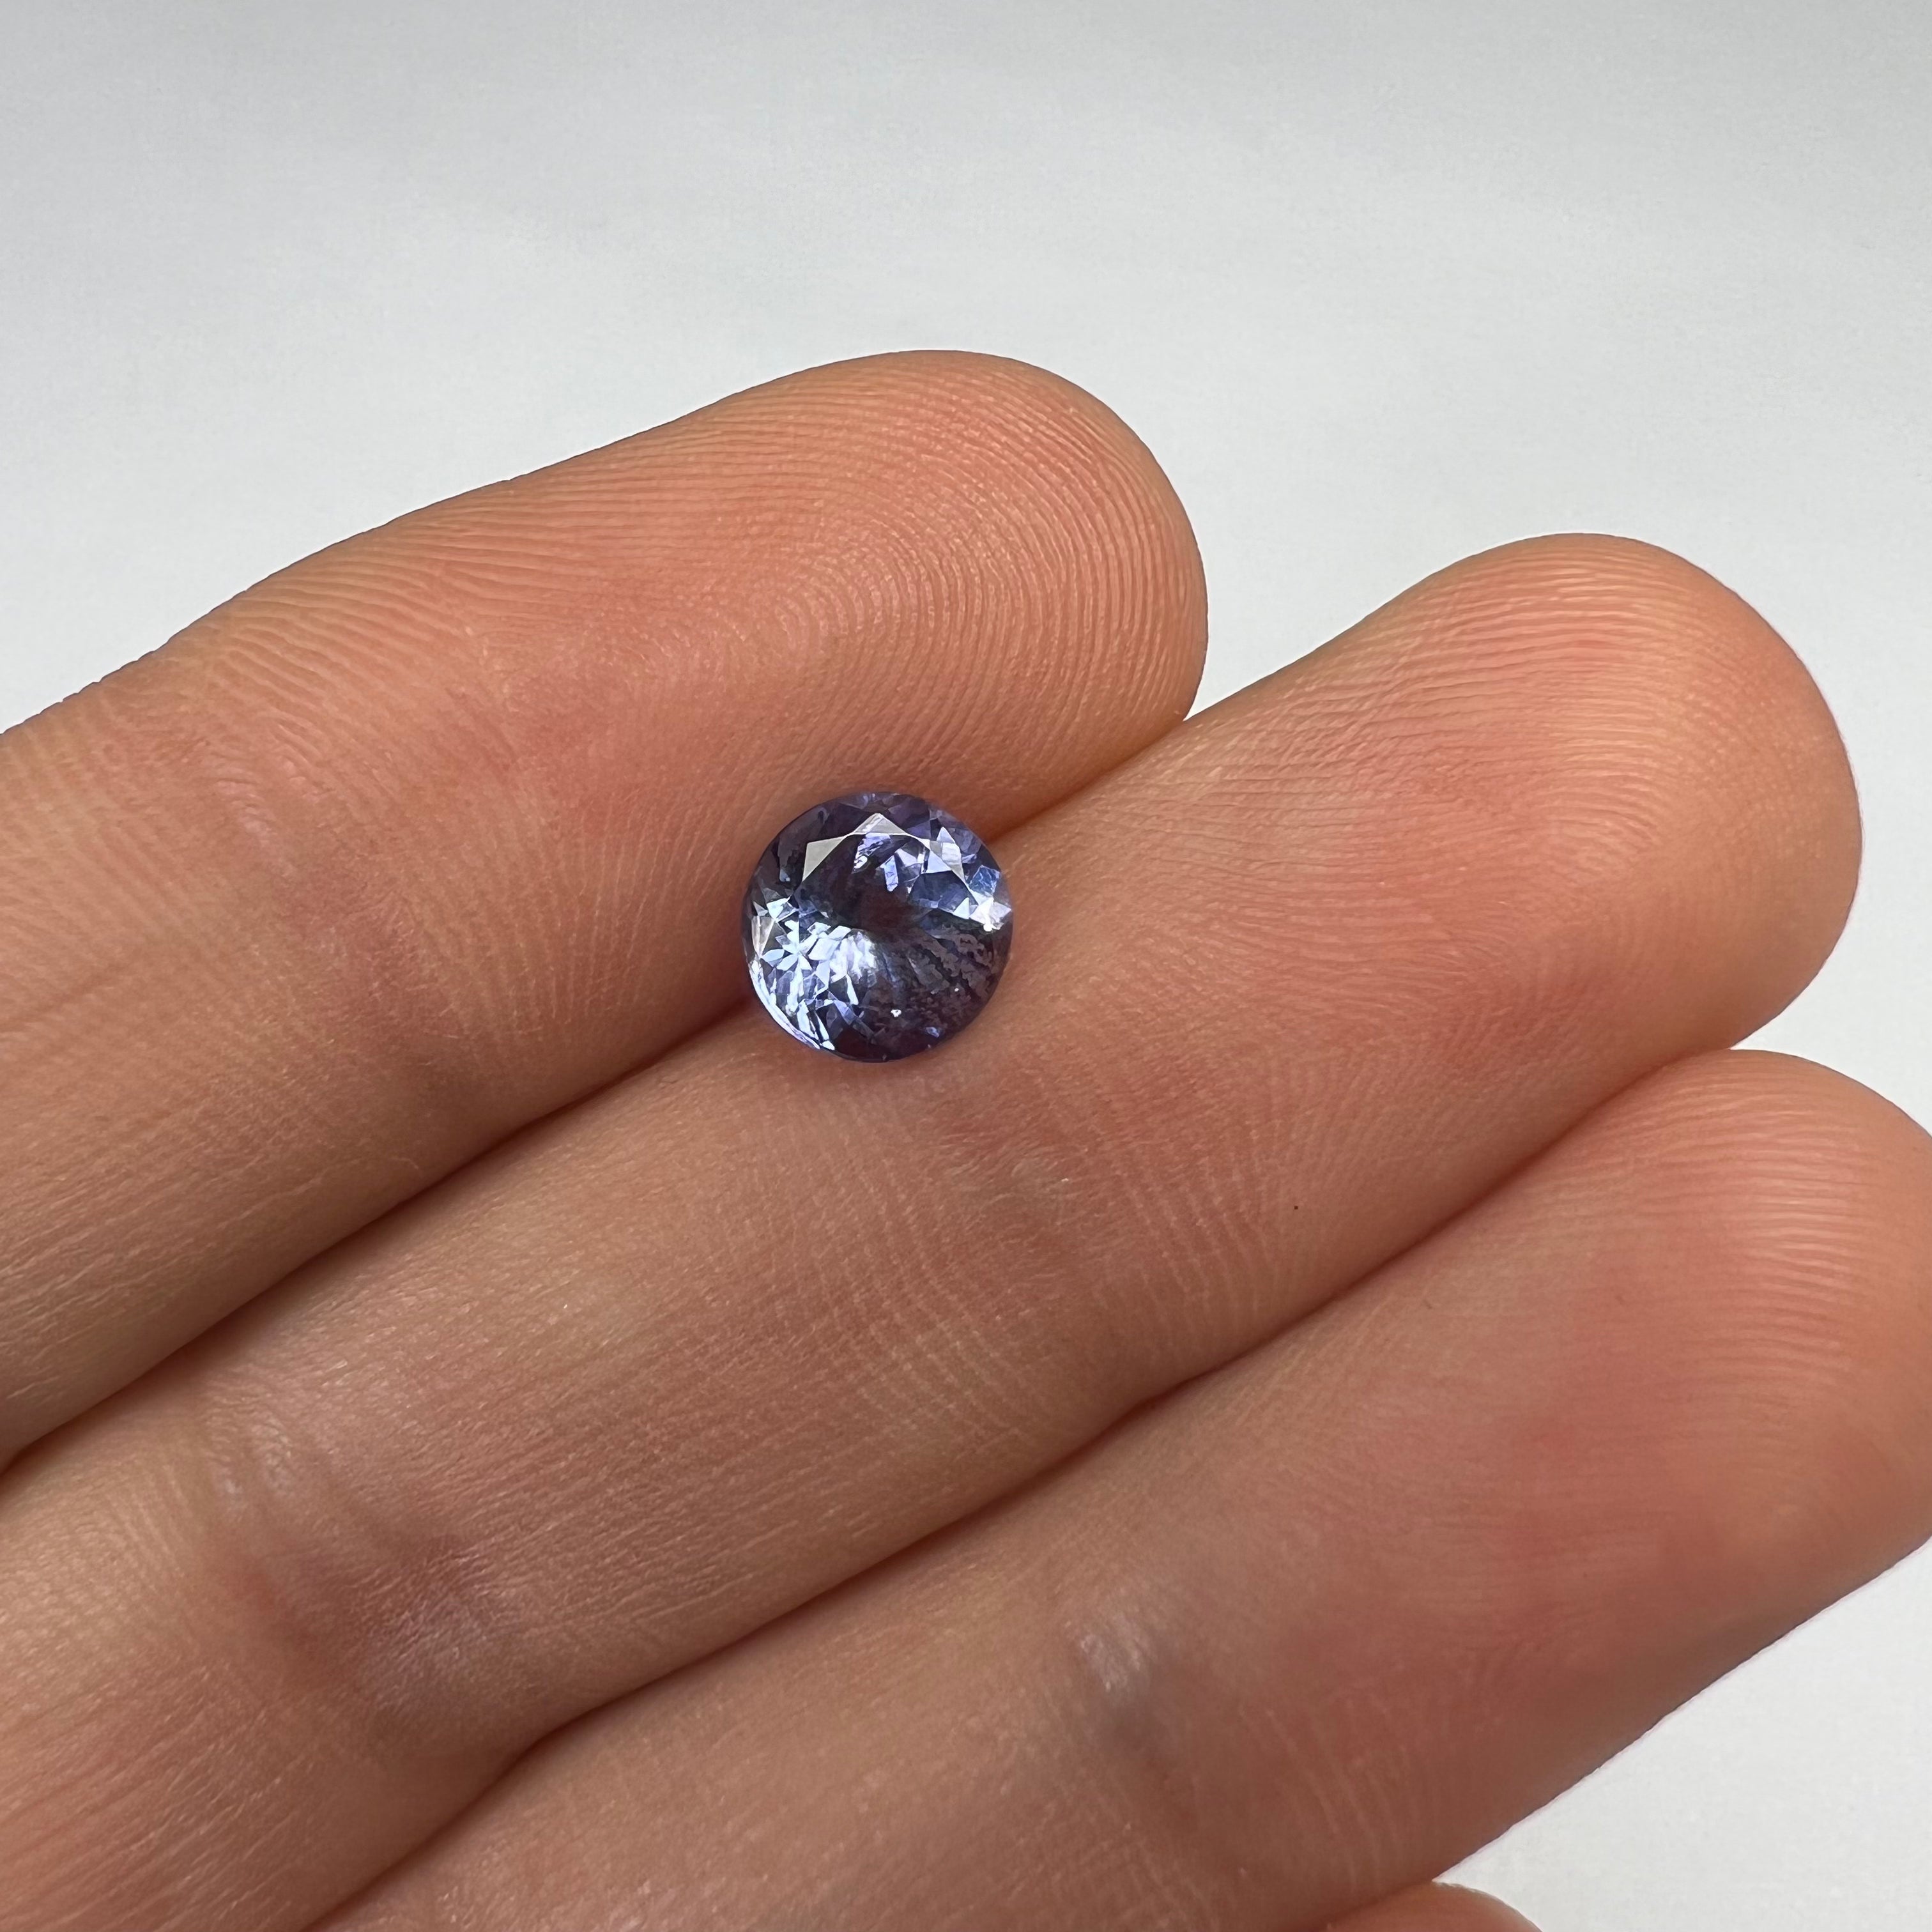 1.46CTW Loose Natural Round Tanzanite 6.94x4.48mm Earth mined Gemstone